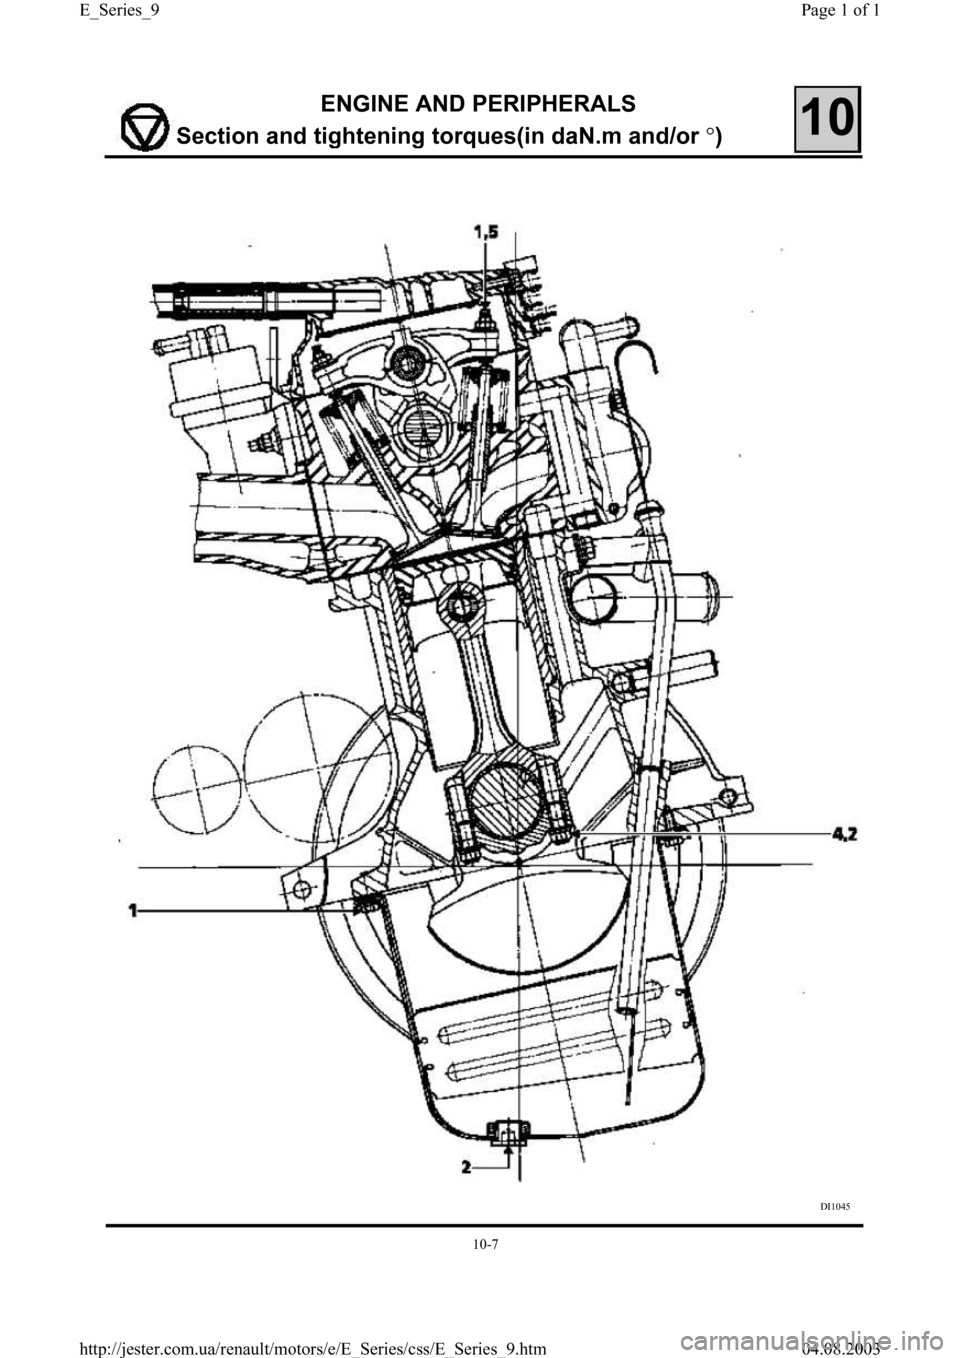 RENAULT CLIO 1997 X57 / 1.G Petrol Engines Workshop Manual ENGINE AND PERIPHERALS
Section and ti
ghtening torques(in daN.m and/or °)10
DI1045
10-7
Page 1 of 1 E_Series_9
04.08.2003 http://jester.com.ua/renault/motors/e/E_Series/css/E_Series_9.htm 